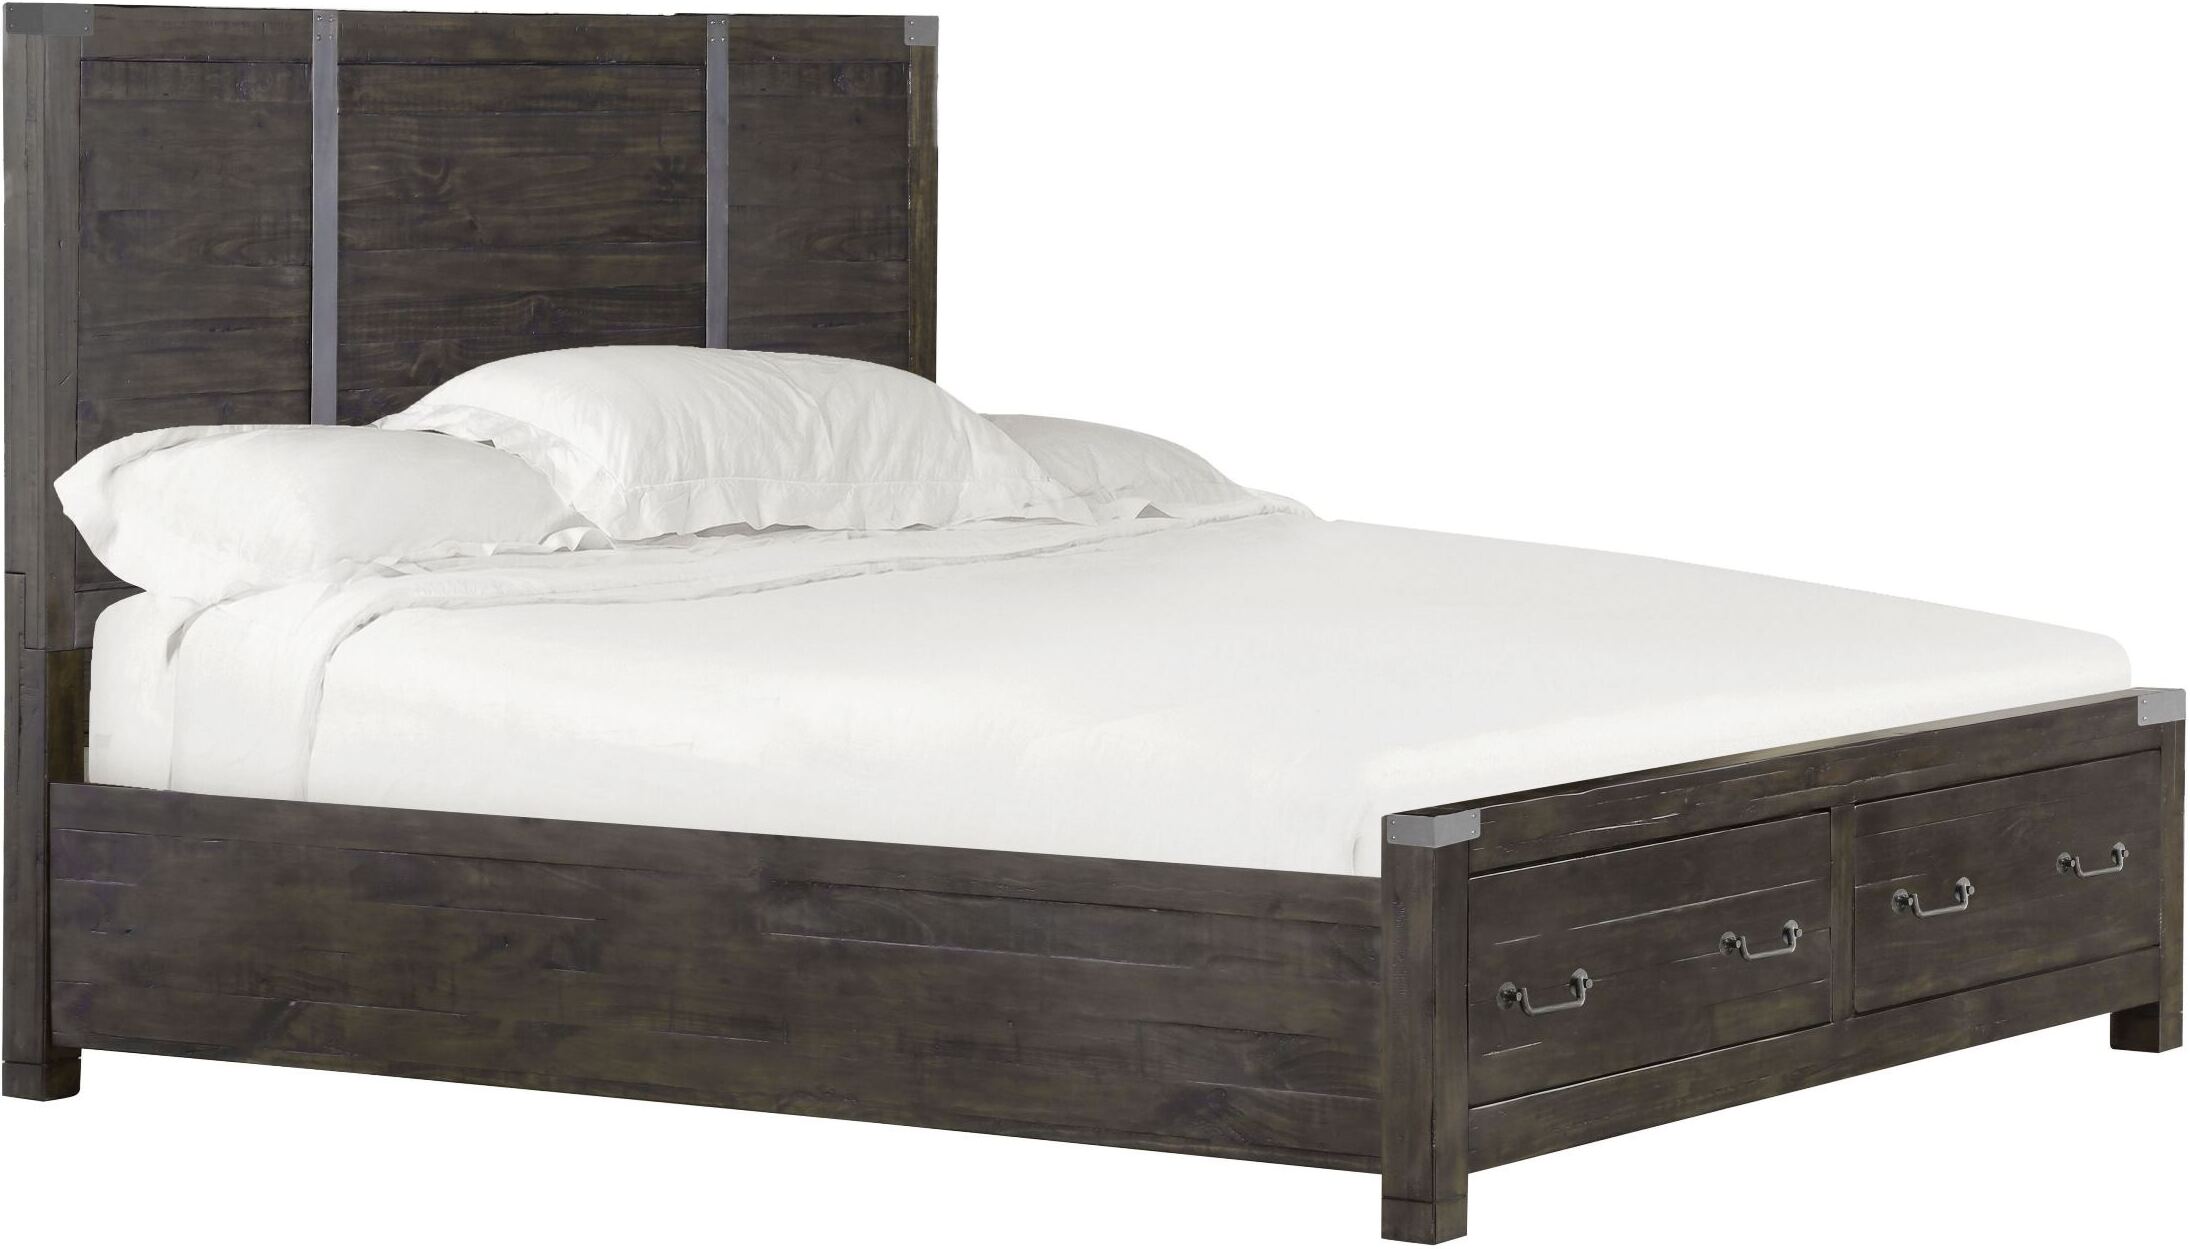 Rustic Pine King Panel Storage Bed, Paxton Cal King Storage Bed